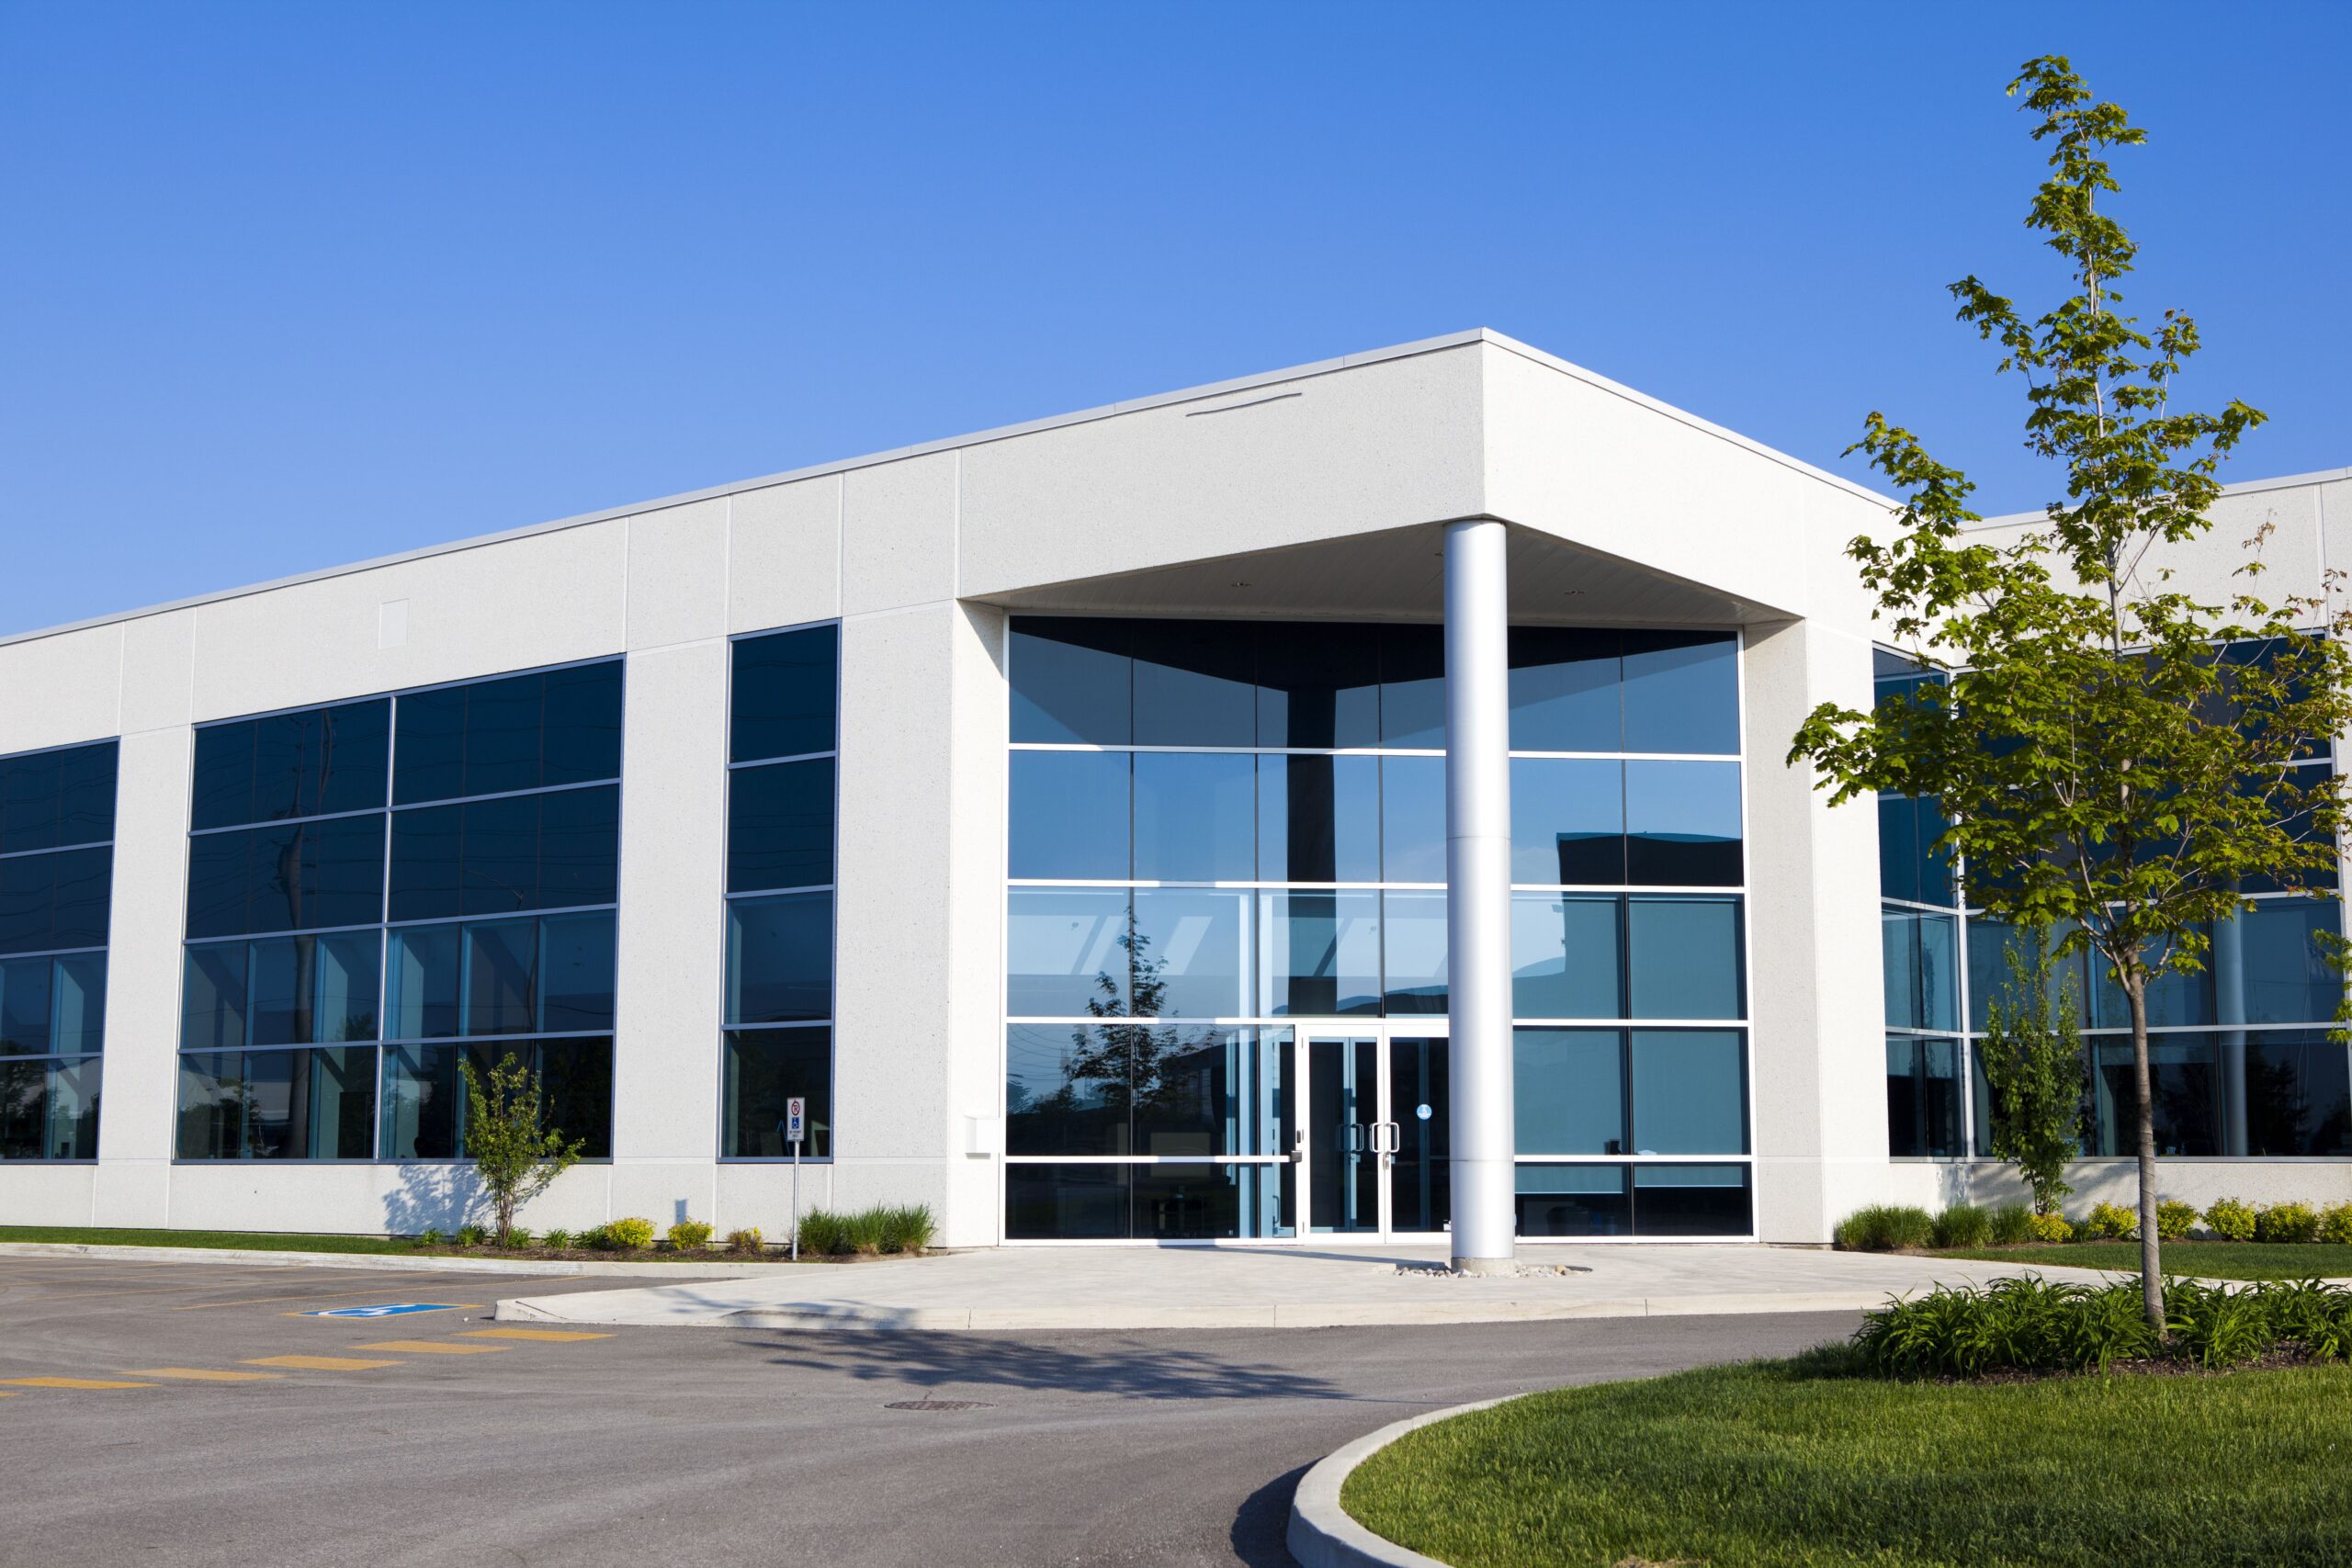 Modern commercial building with large windows and potential for professional window tinting.